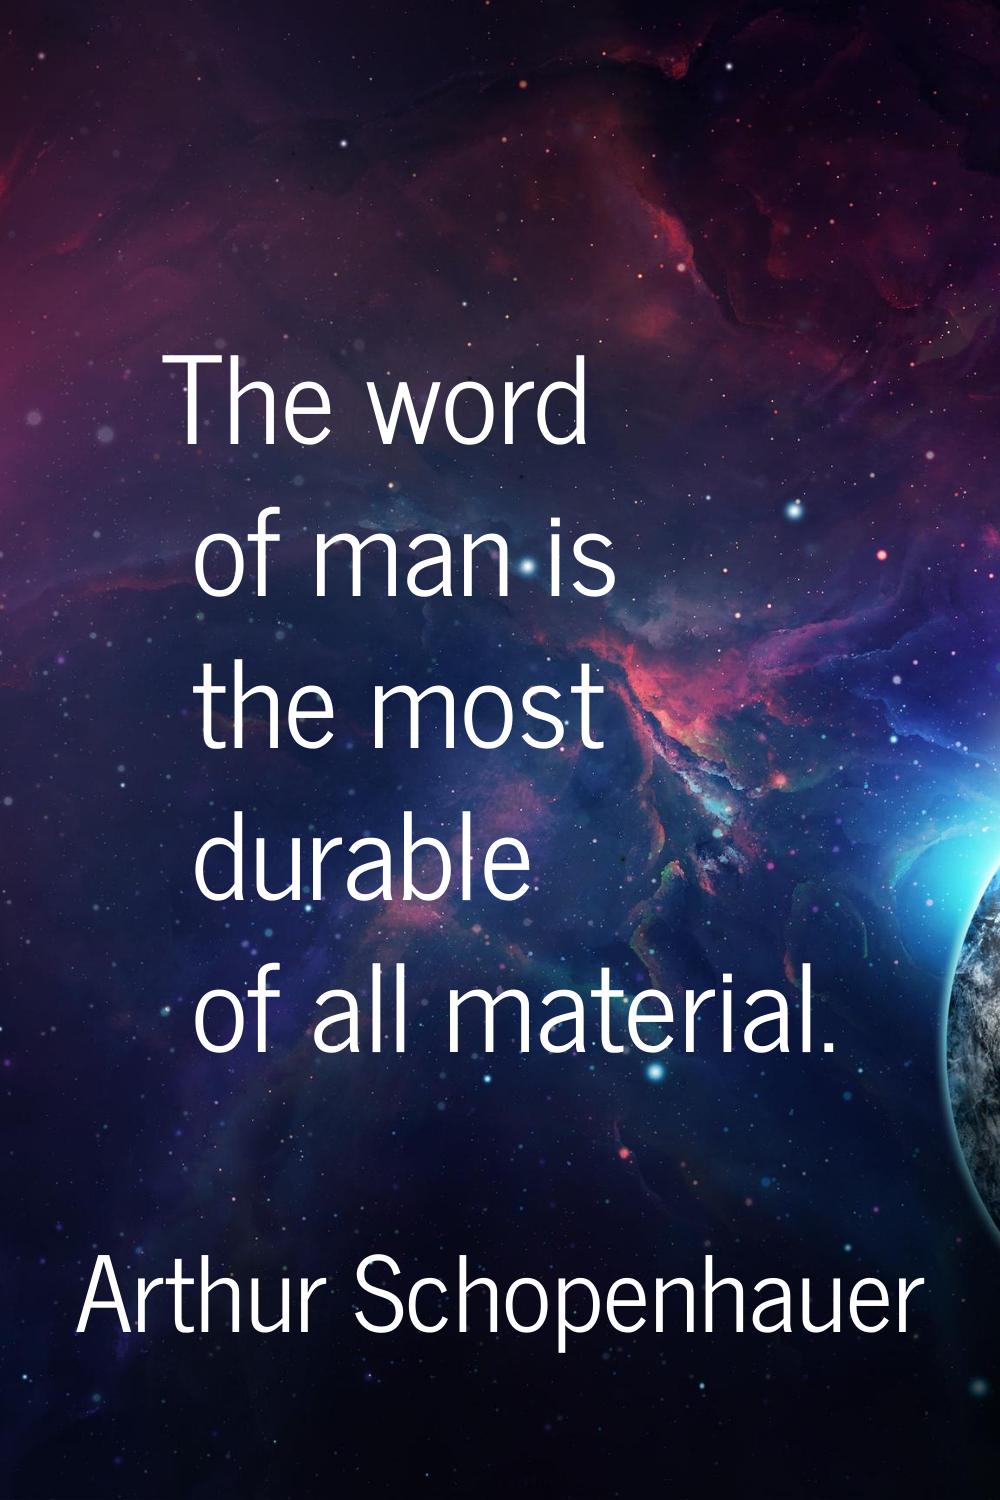 The word of man is the most durable of all material.